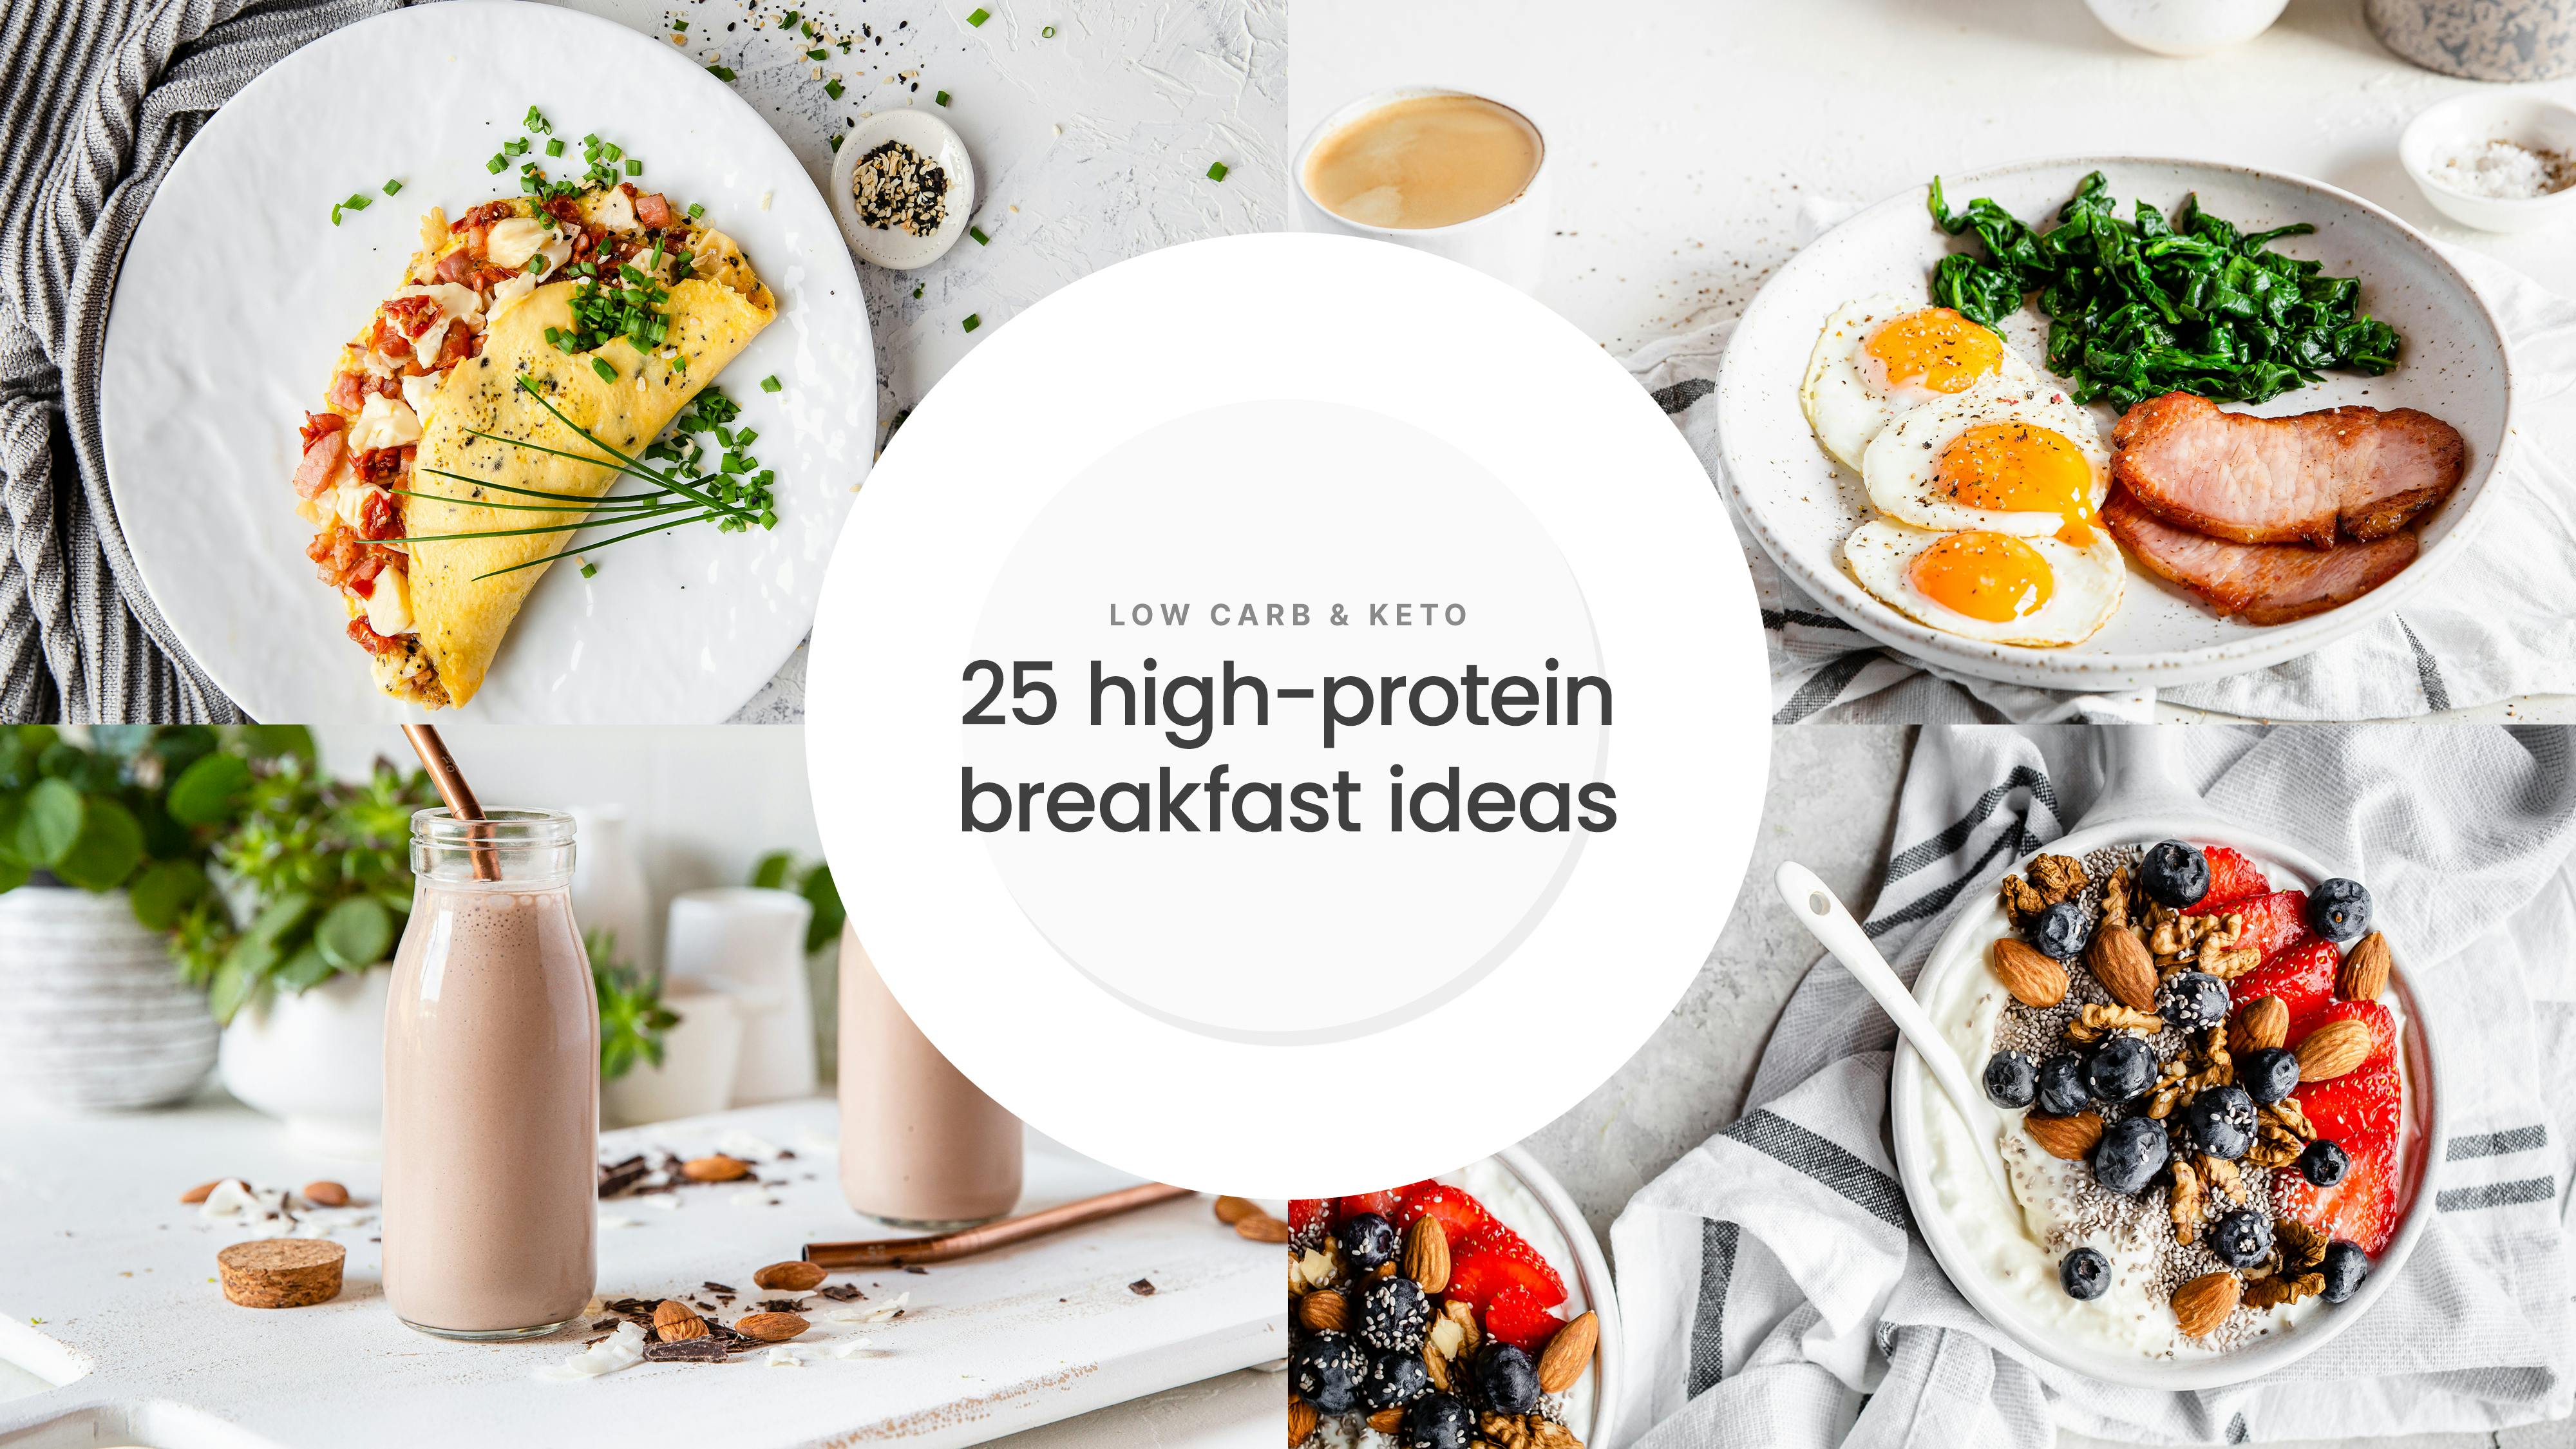 25 Healthy Bowl Recipes - Breakfast, Meal Prep, and More! - Eat the Gains